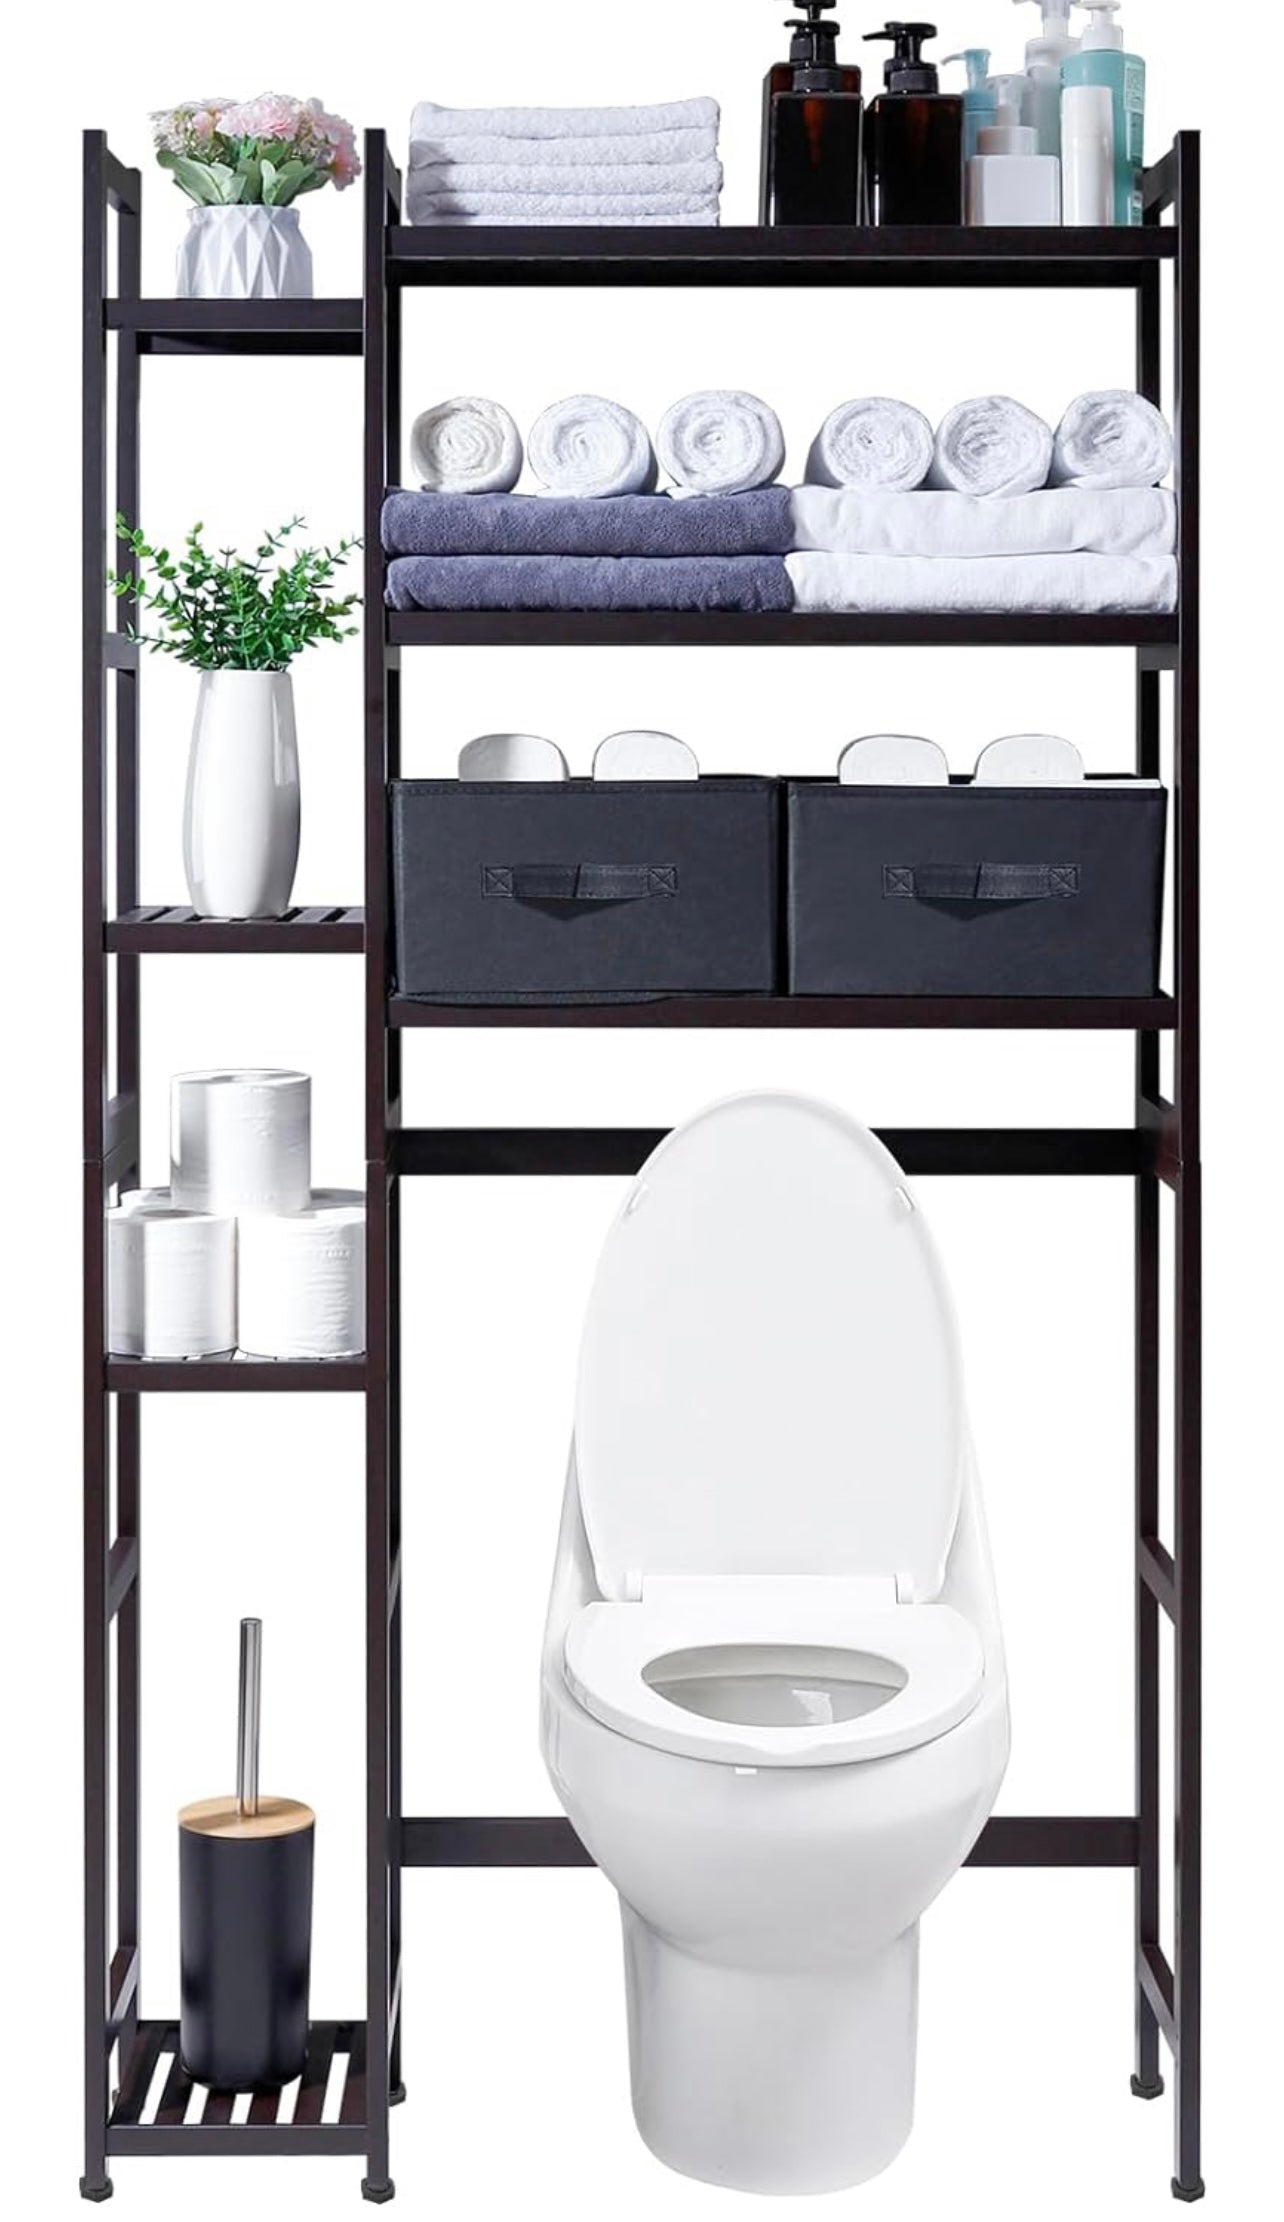 Homde Over The Toilet Storage with Basket and Drawer, Bamboo Bathroom Organizer with Adjustable Shelf & Waterproof Feet Pad, Space Saver Storage Rack for Bathroom, Restroom, Laundry, Brown